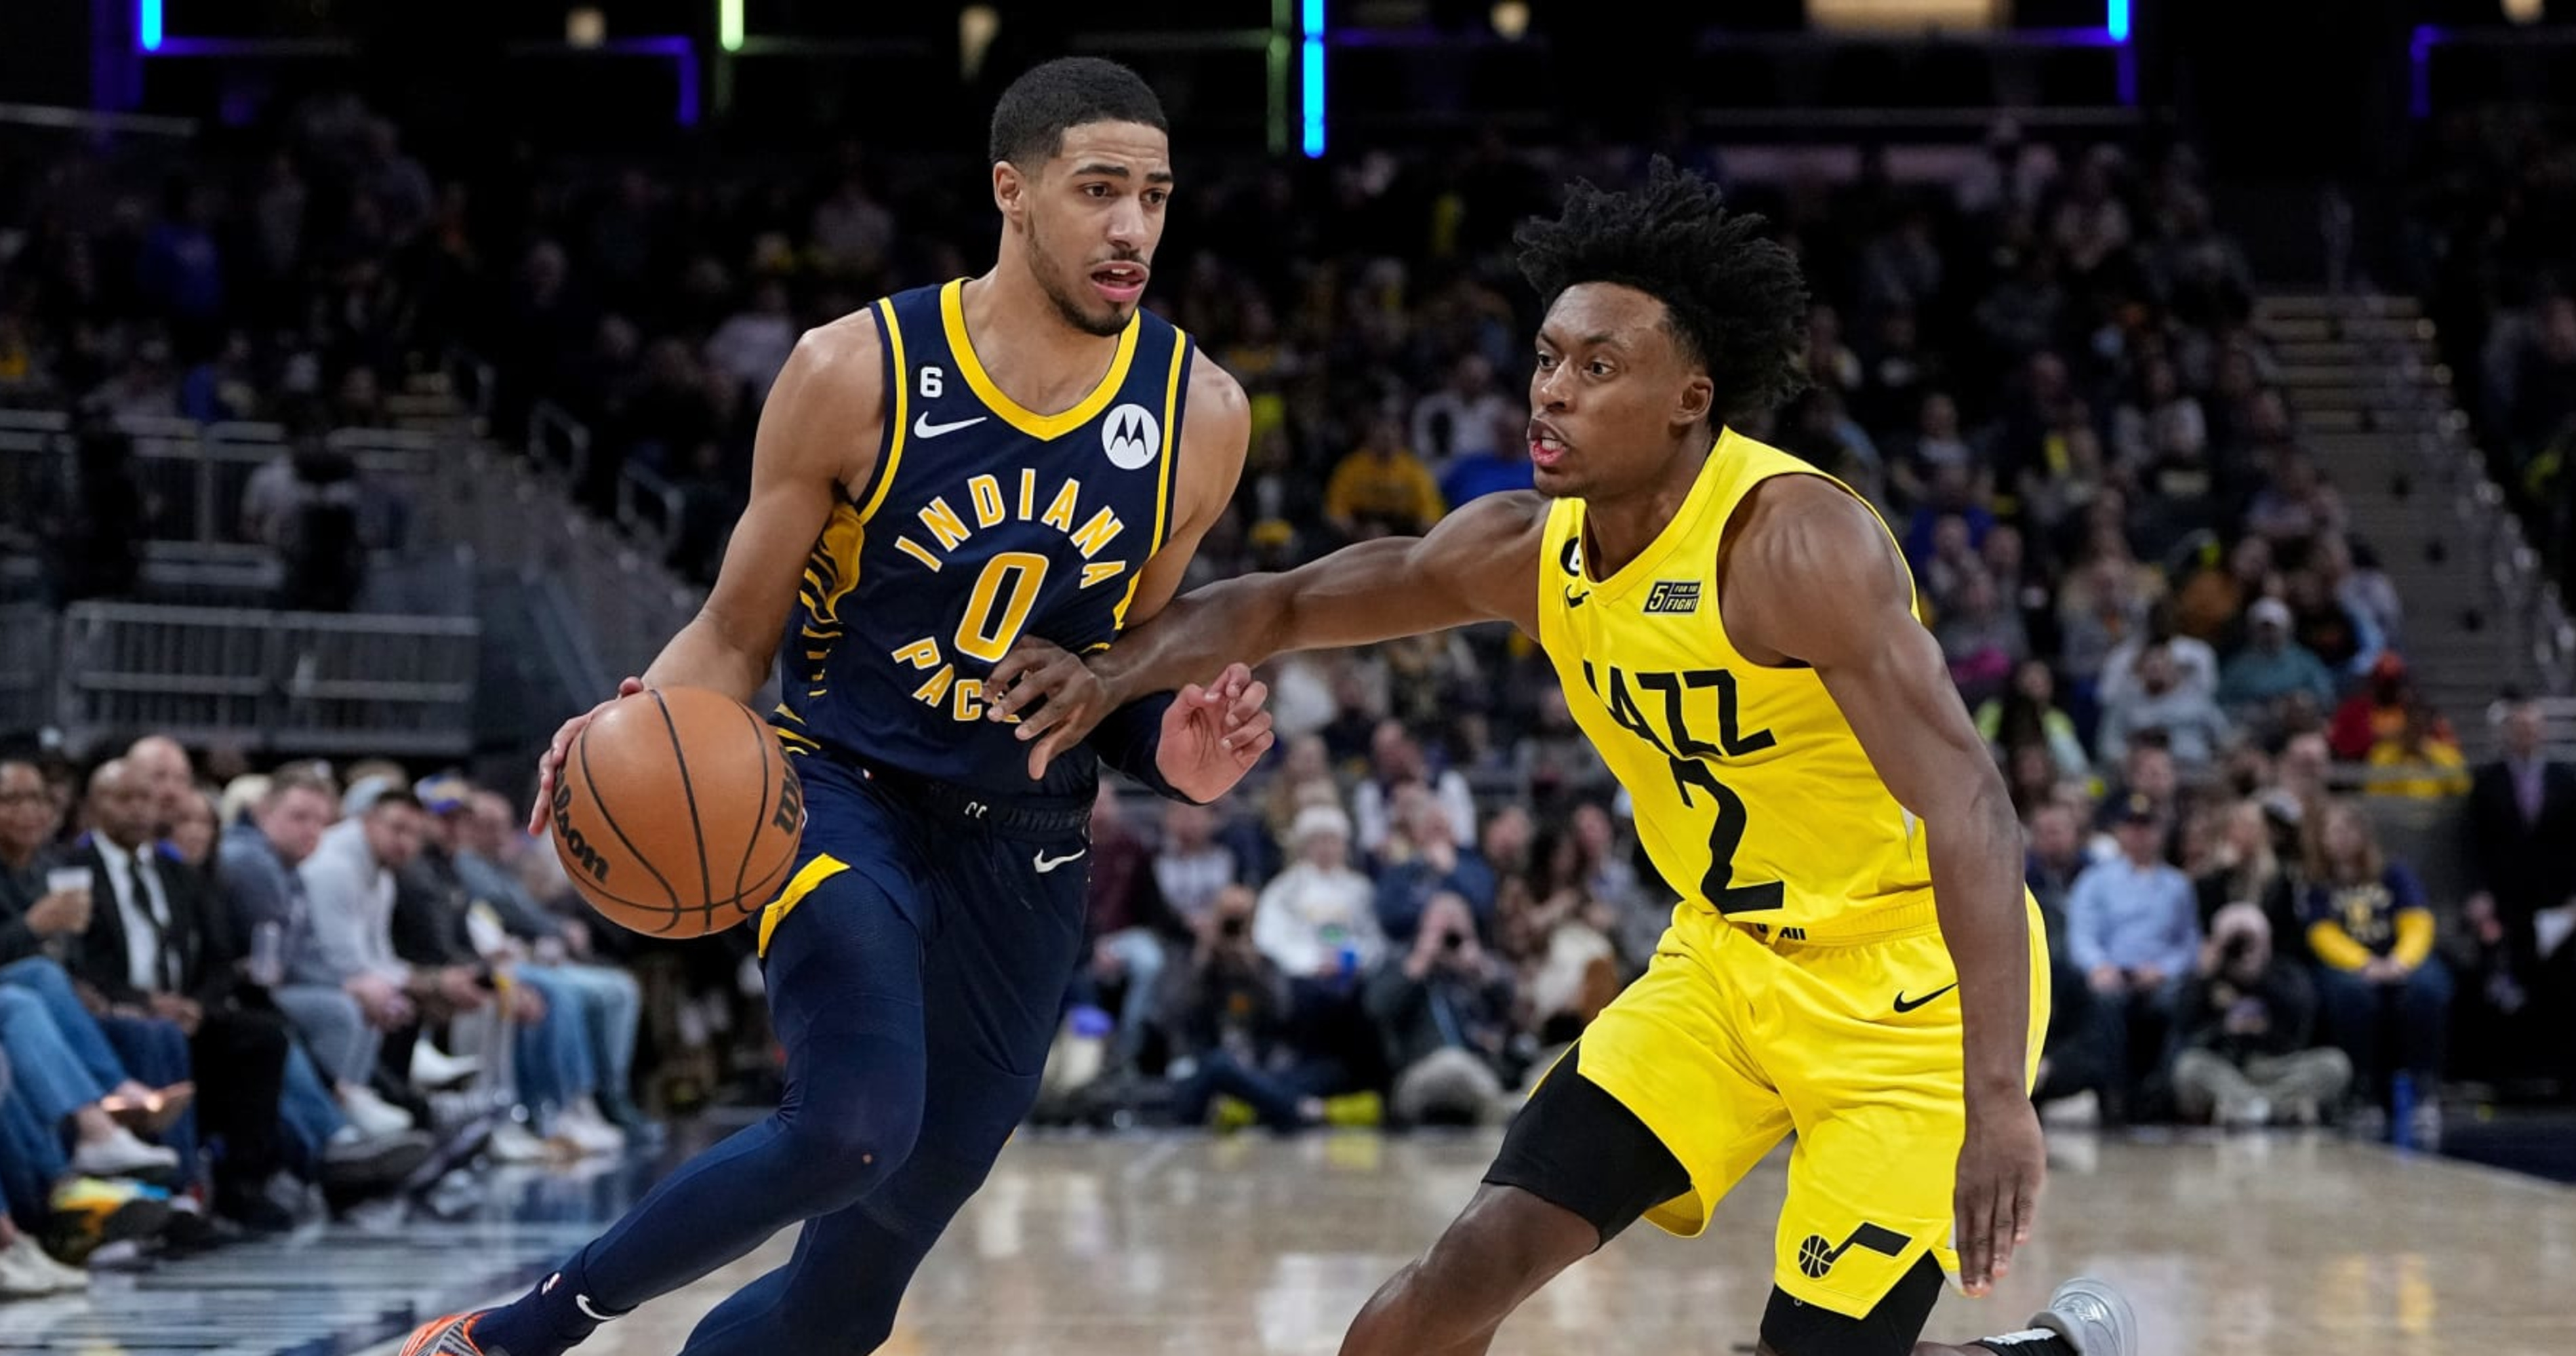 Here's who the Pacers picked in the 2023 NBA Draft